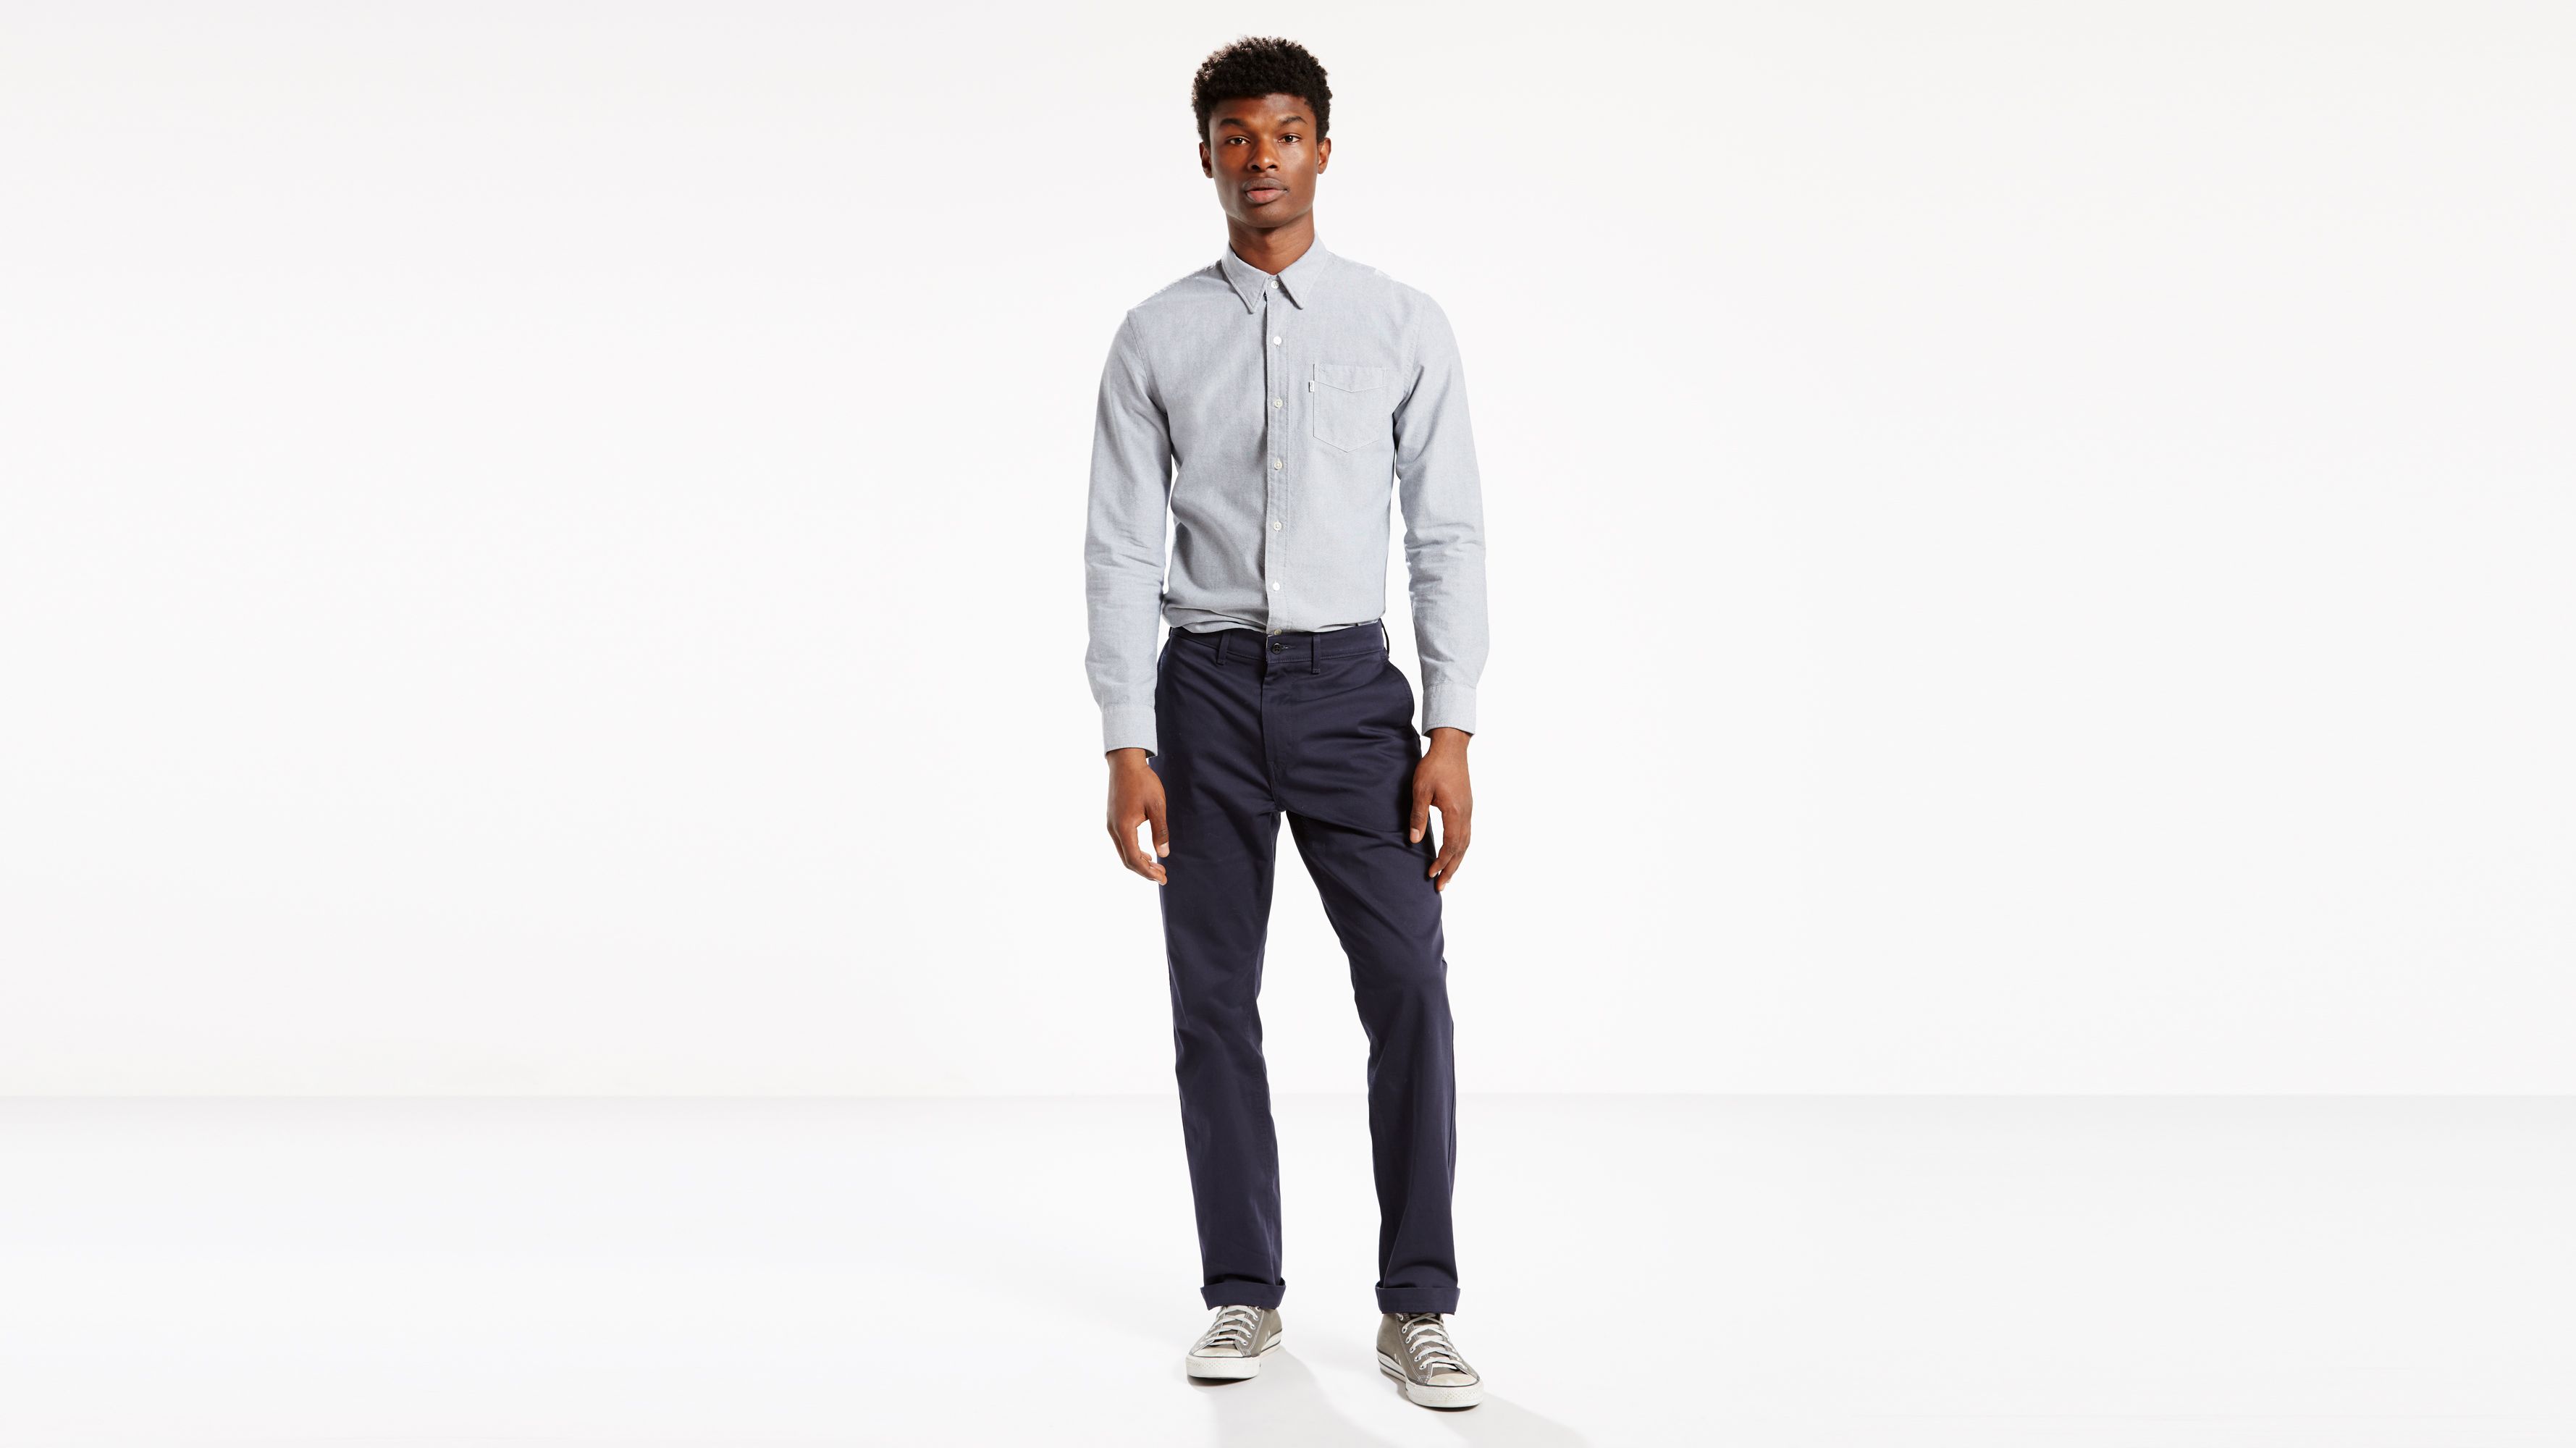 levi's 541 athletic fit chino